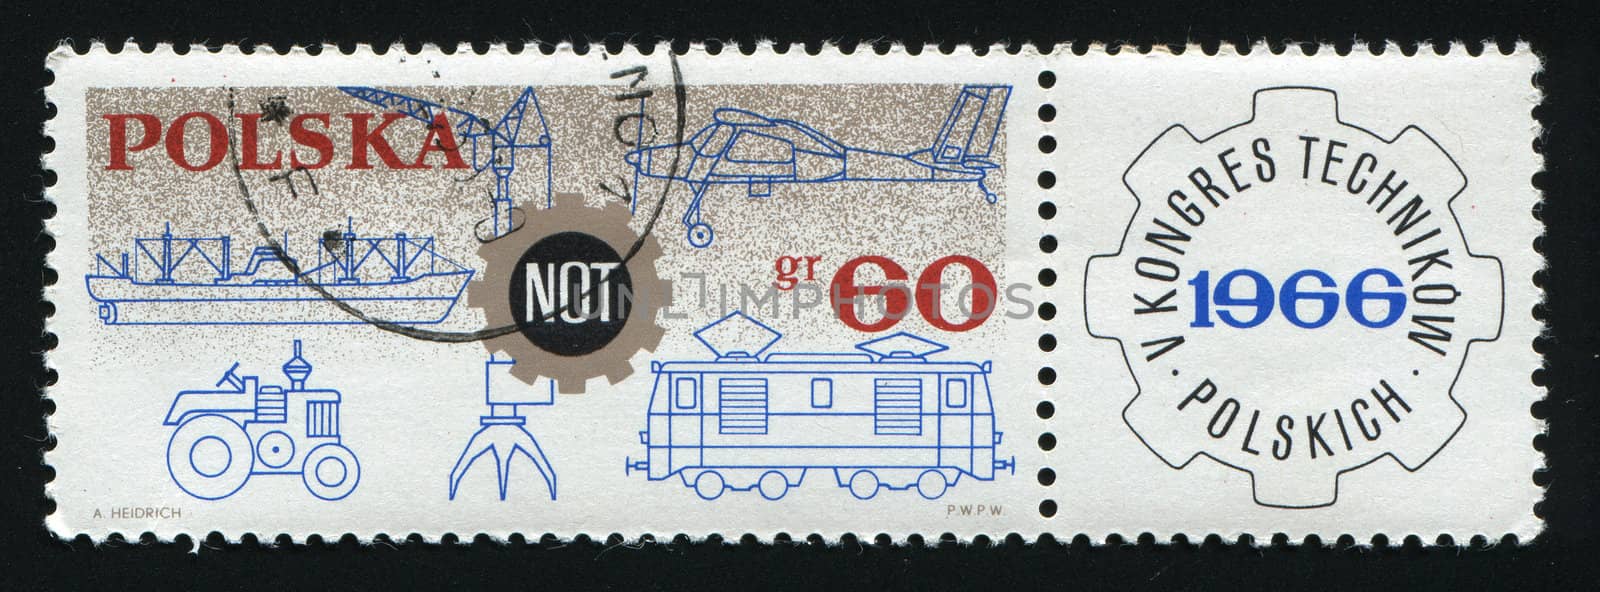 postmark by rook